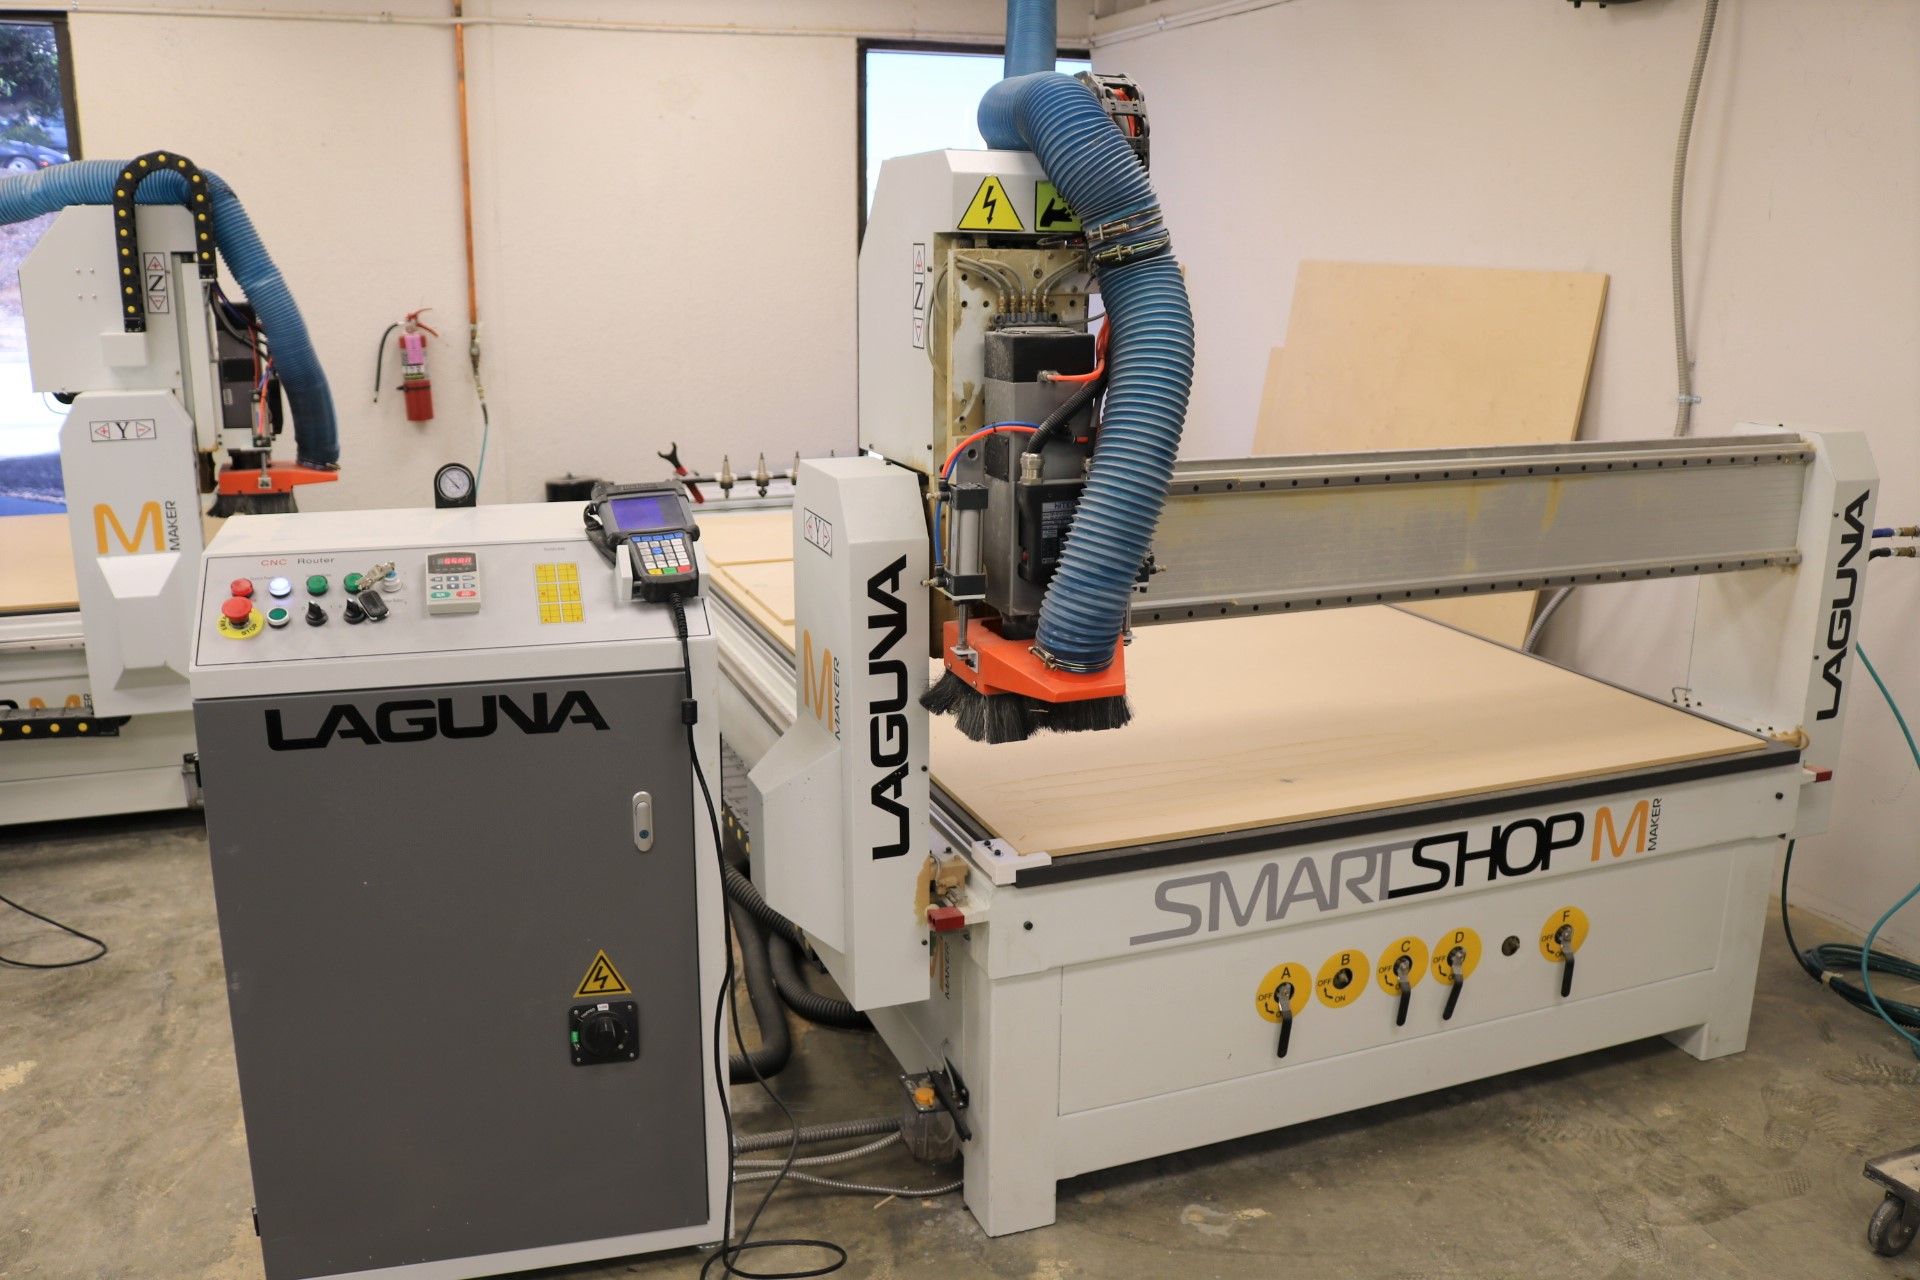 2018 LAGUNA CNC ROUTER, MODEL MCNC SWIFT, 8 POSITION AUTOMATIC TOOL RACK, SINGLE SPINDLE 5.5 HP